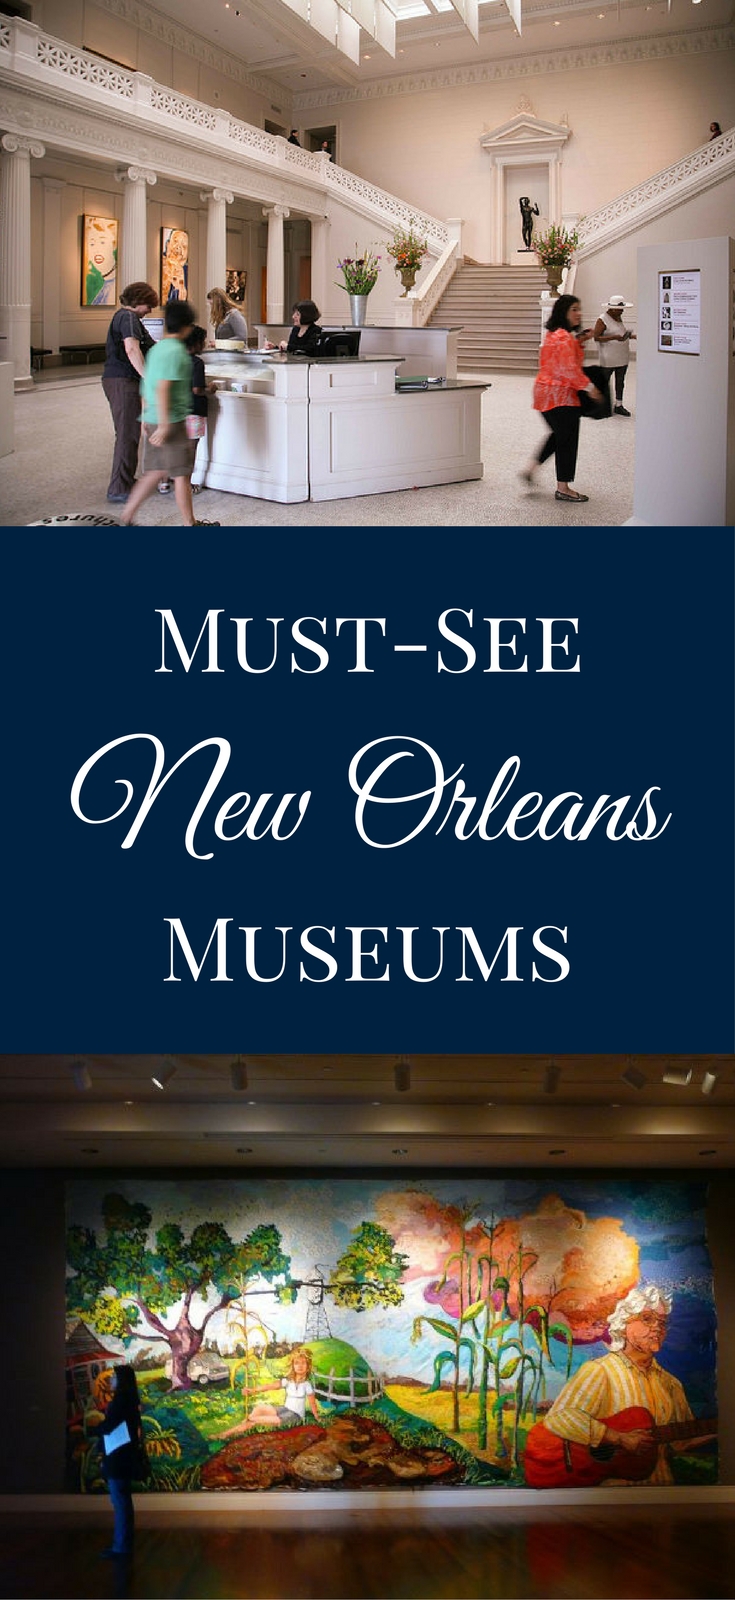 Each August, museums around New Orleans offer patrons special savings with New Orleans Museum Month. We think you'll agree that these museums are worth the trip.